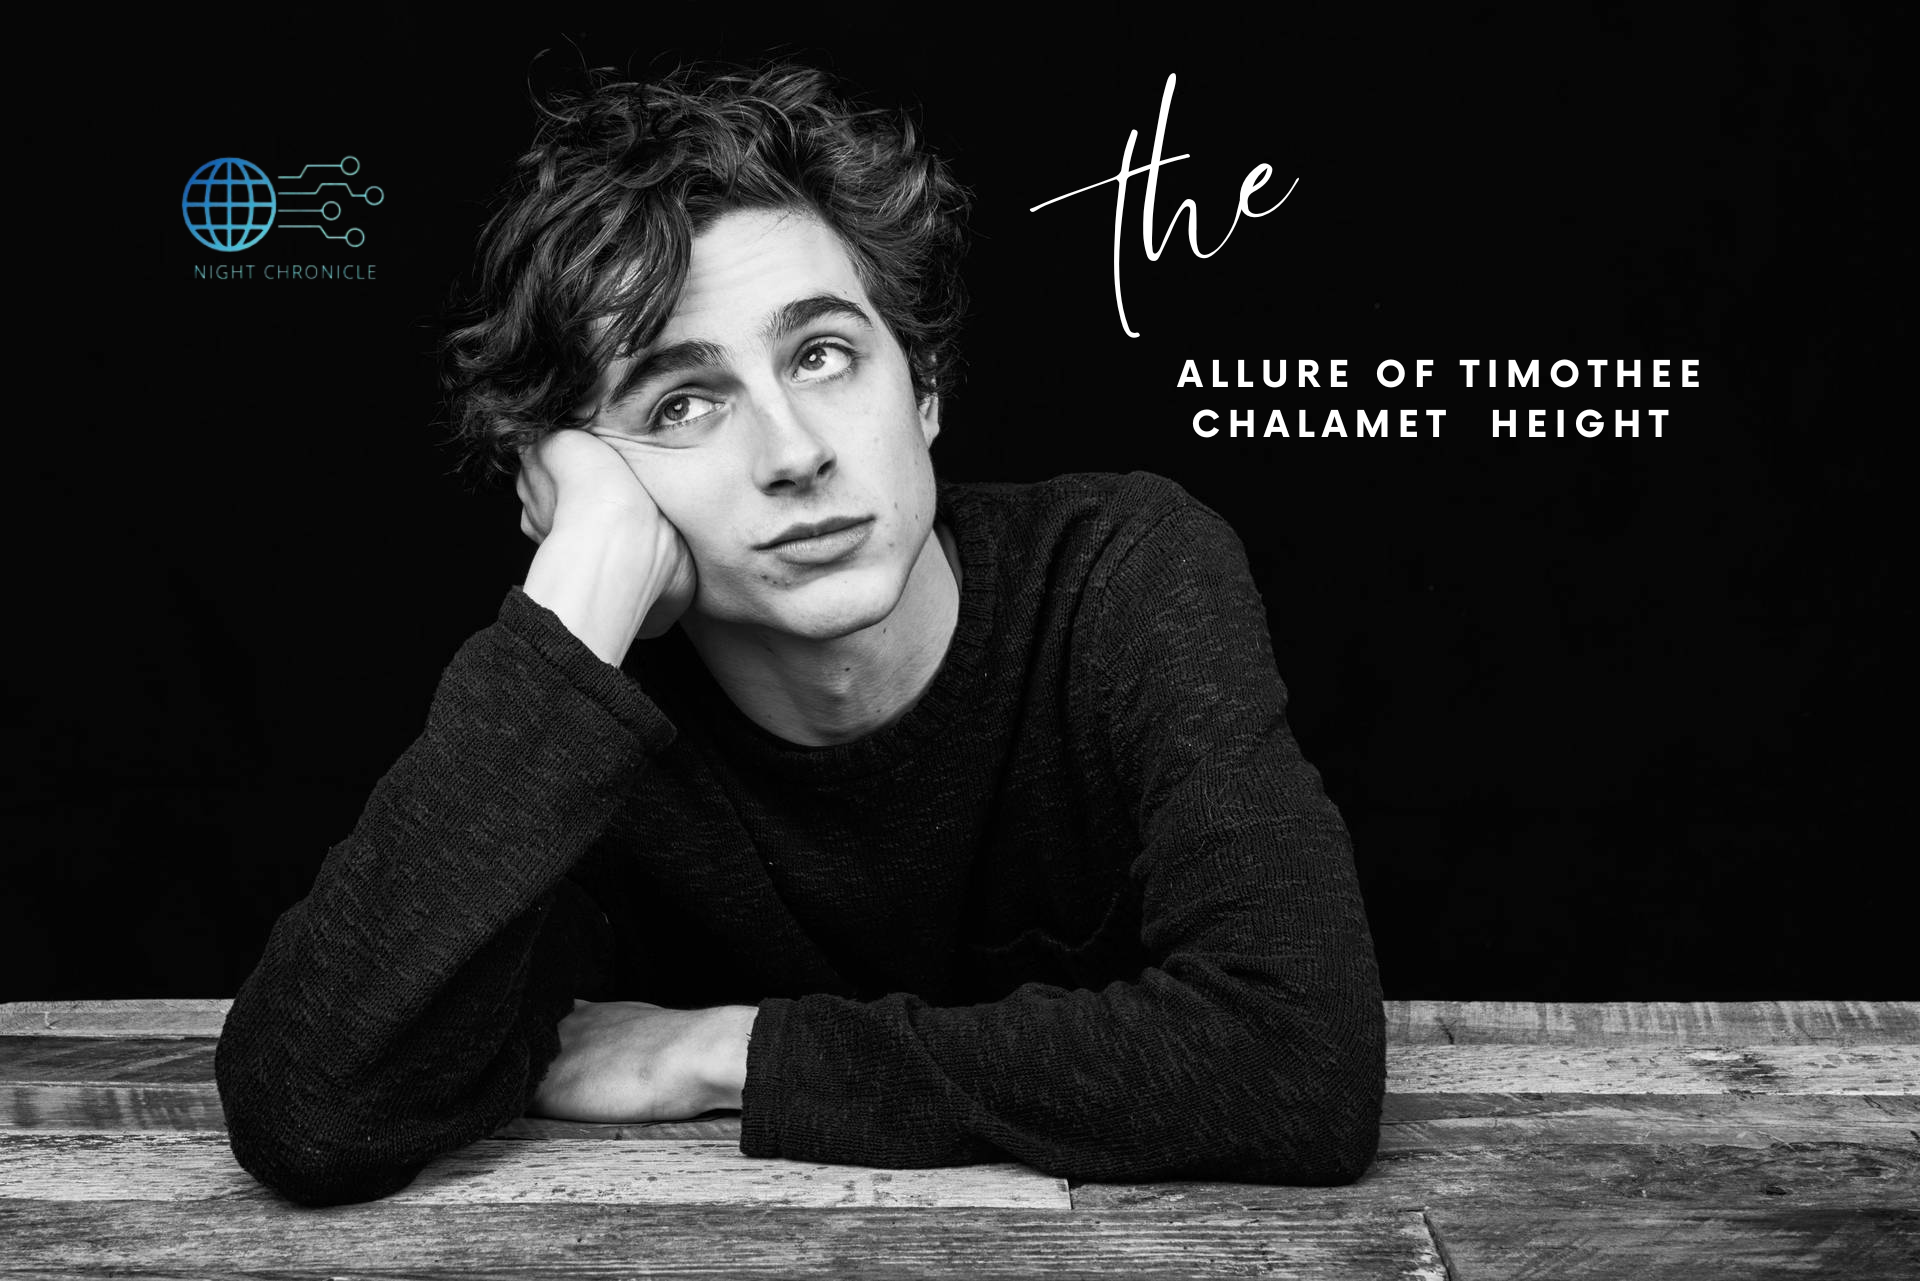 The Allure of Timothee Chalamet Height